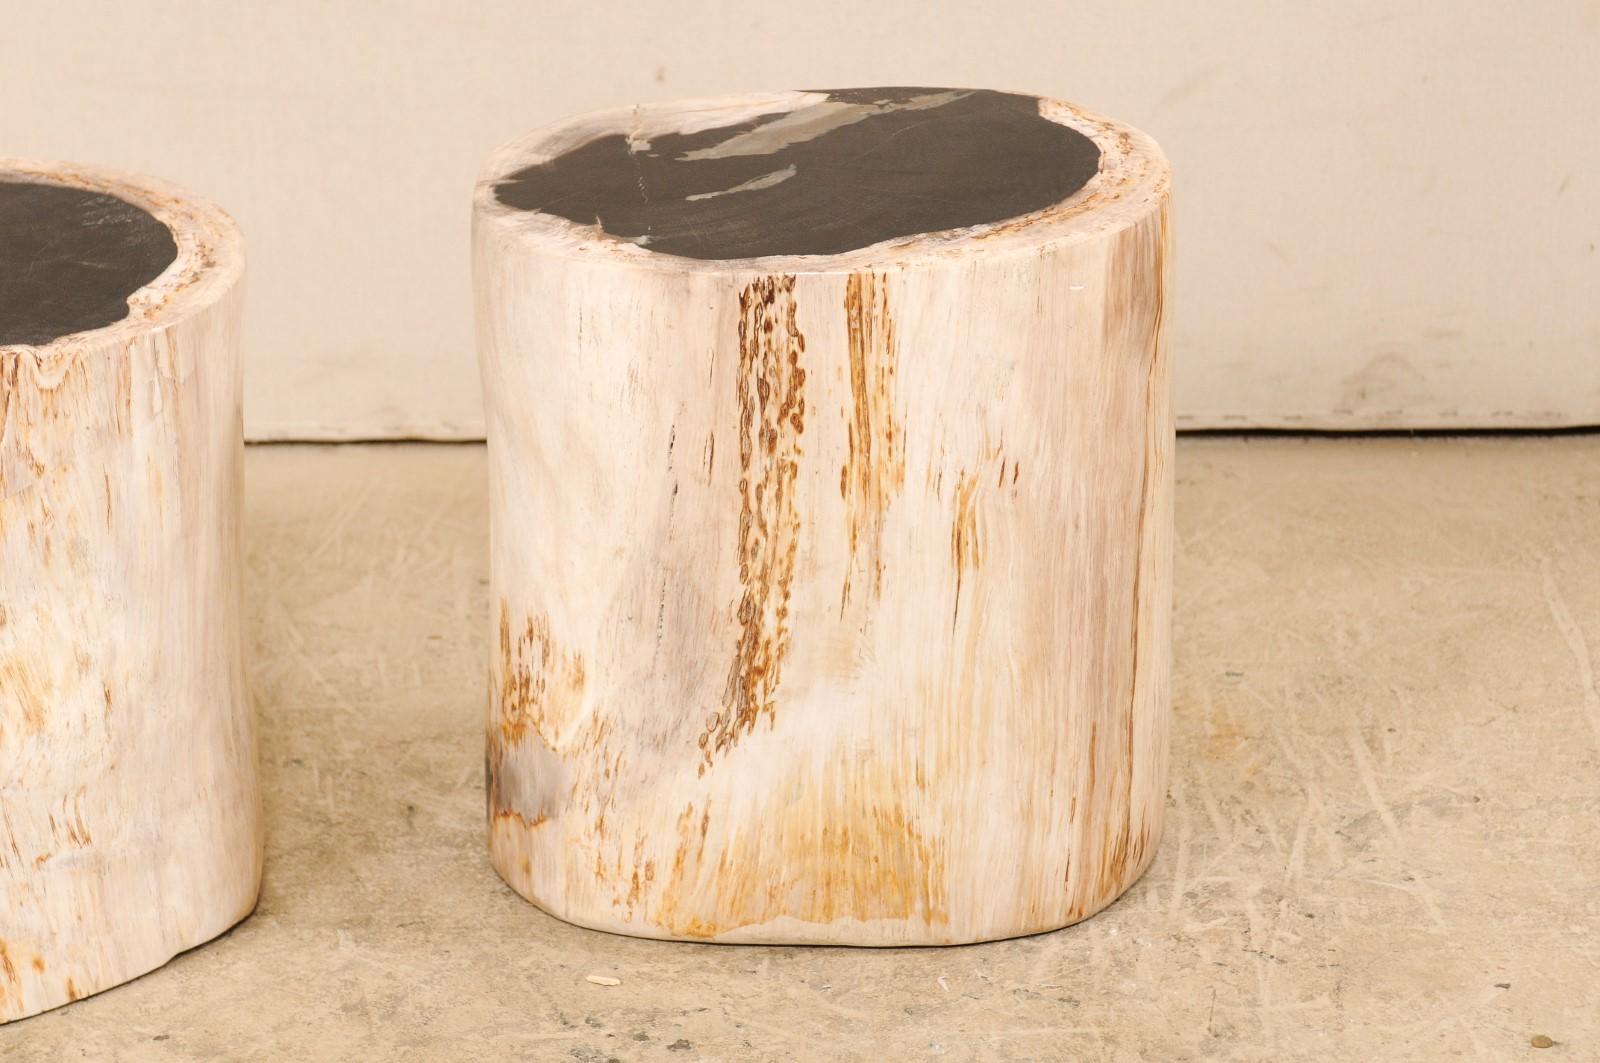 Polished Pair of Petrified Wood Stools or Pedestal Tables with Black Tops & Light Sides